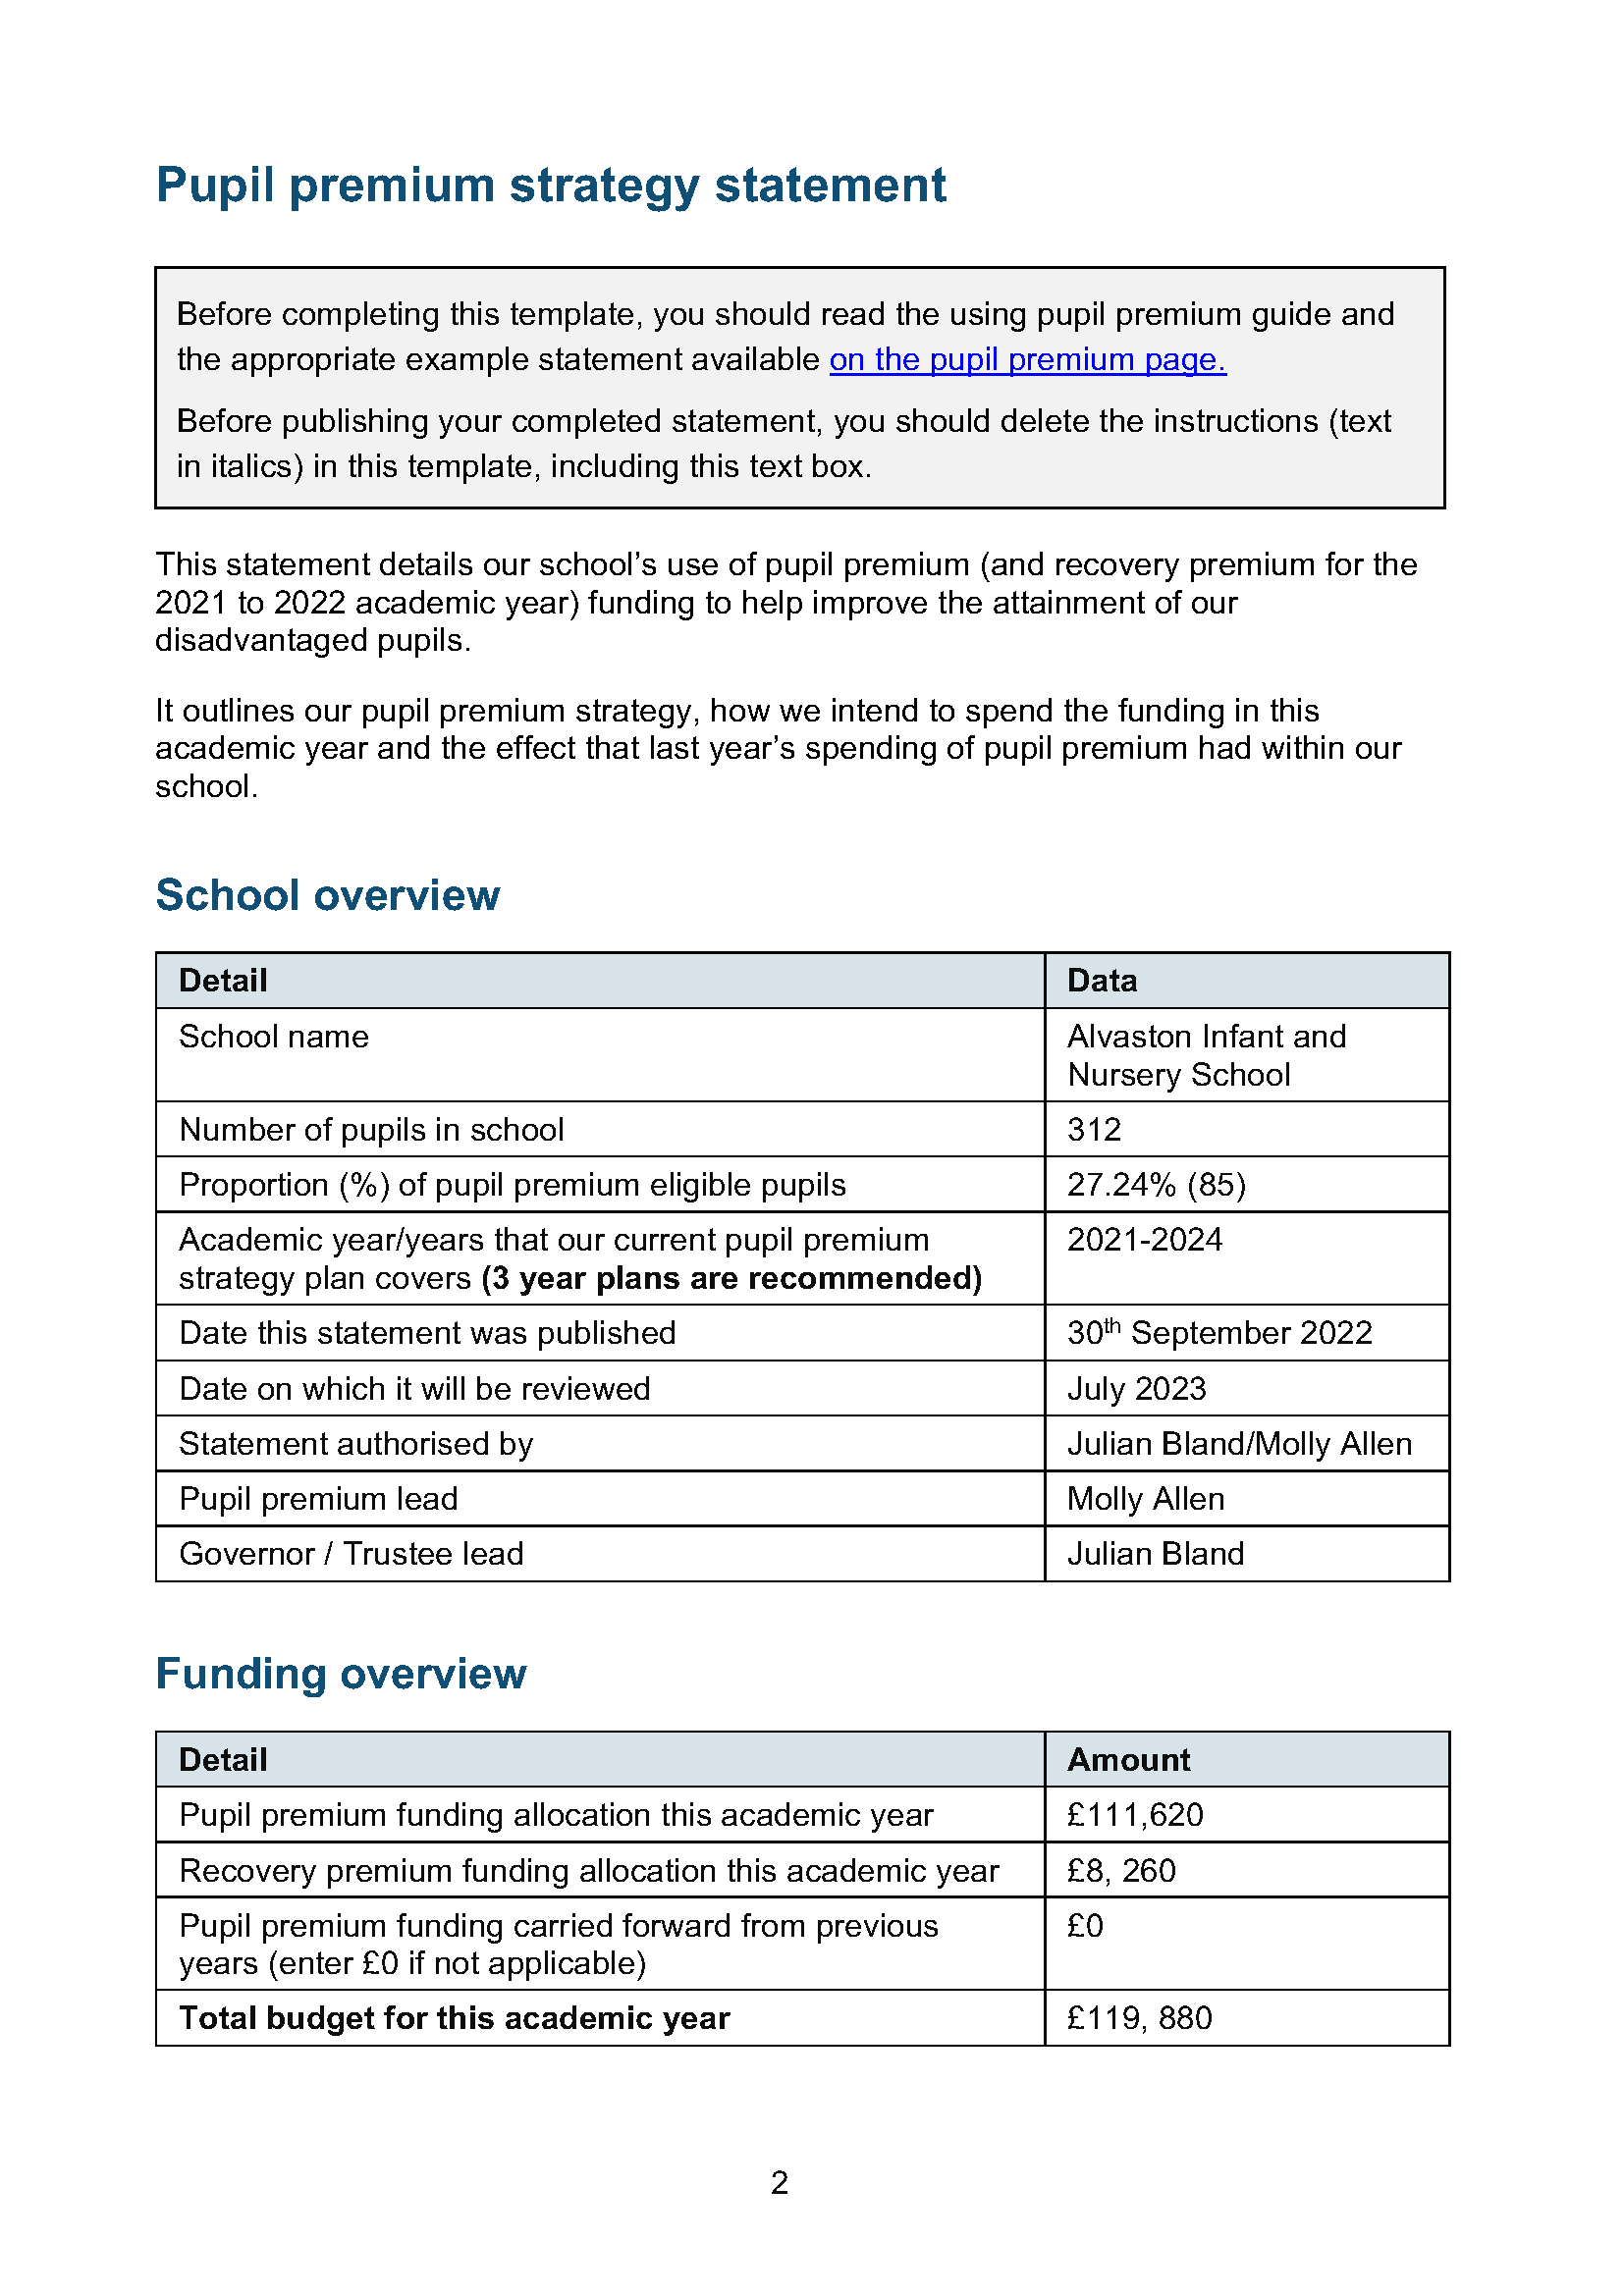 AIS Pupil Premium Strategy Plan 2022 - UPDATED NEW17.10.22_Page_02.png